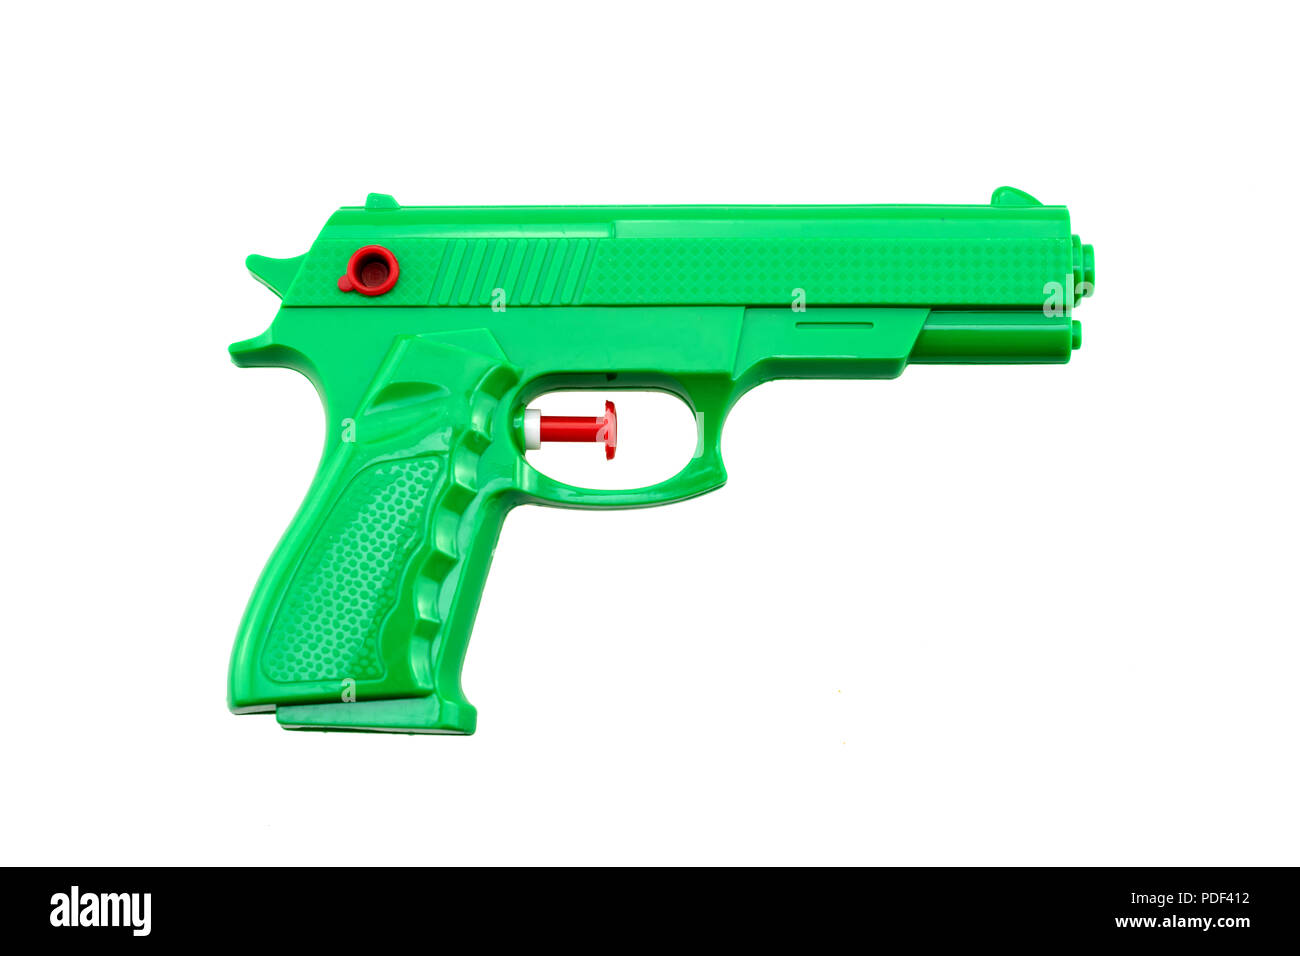 green plastic water toy gun shaped like a real one on white background Stock Photo